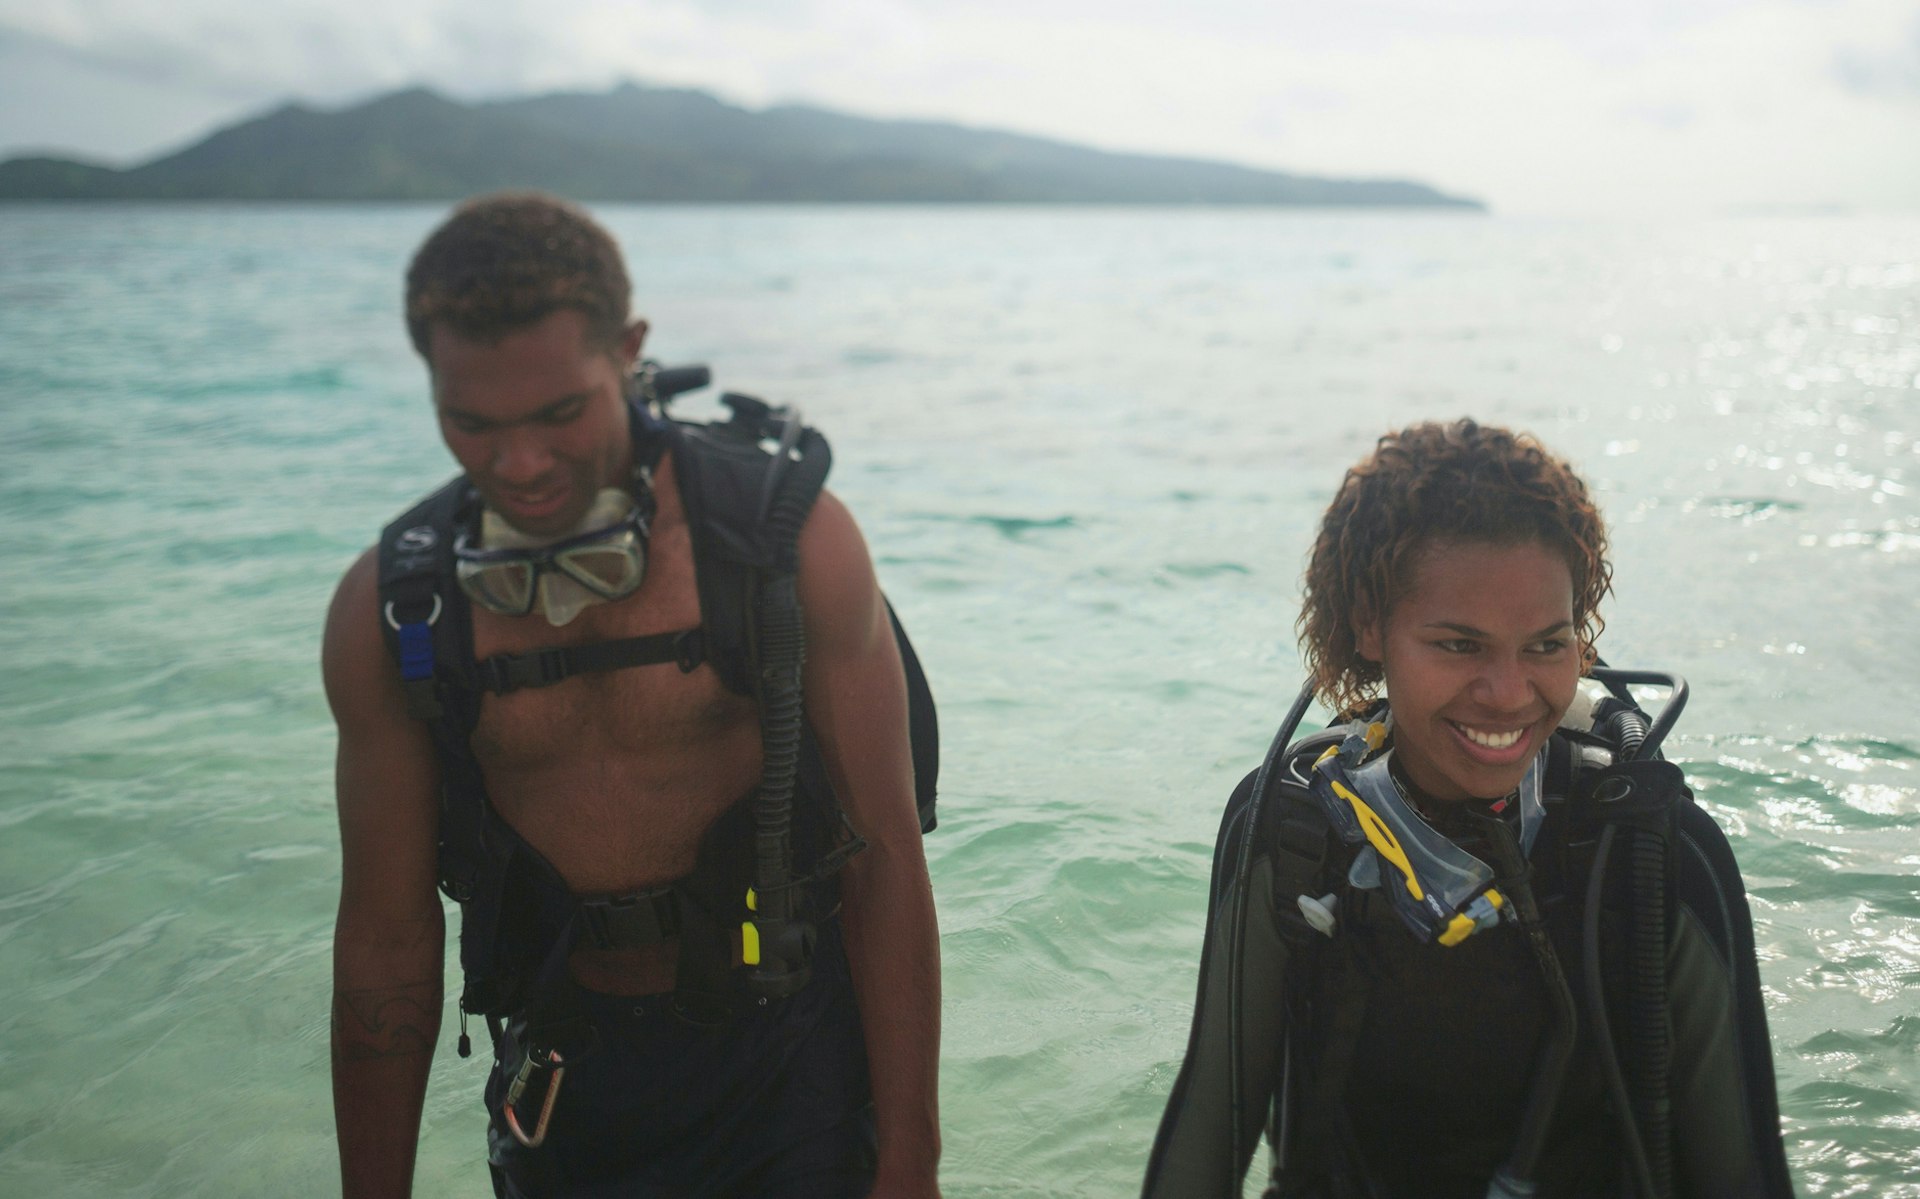 A couple of scuba divers walk out of the ocean in Fiji while smiling